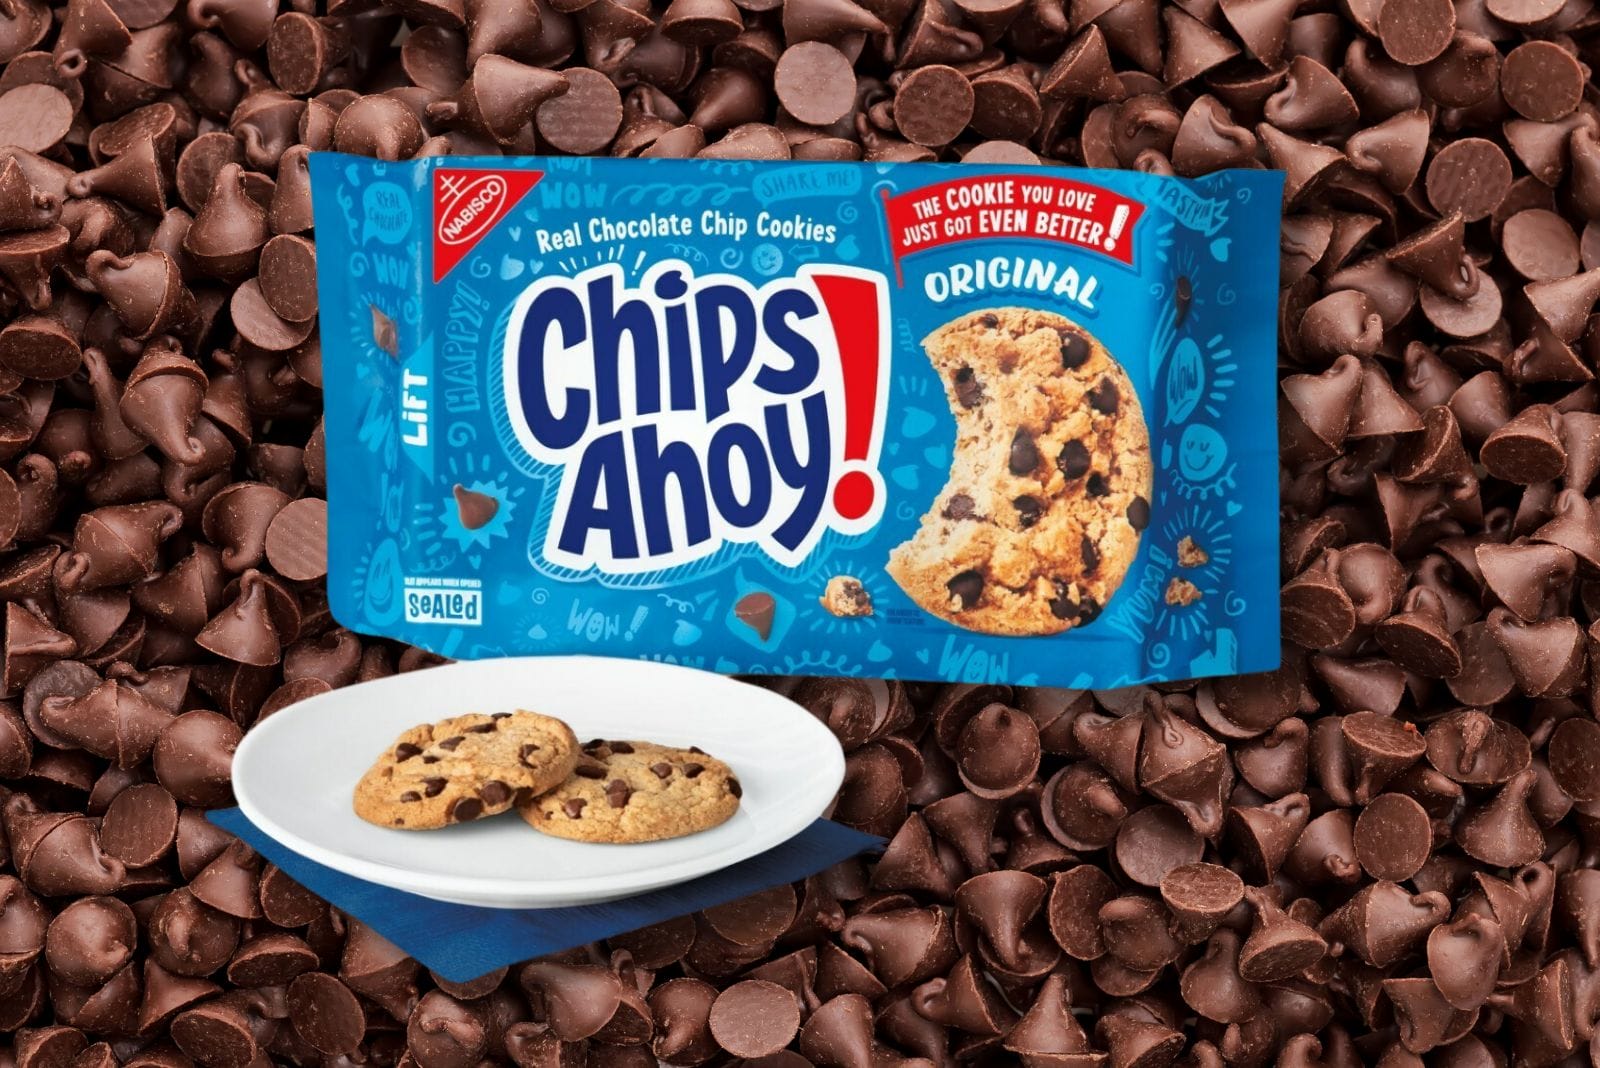 Chips Ahoy chocolate chip cookies in a package and on a plate